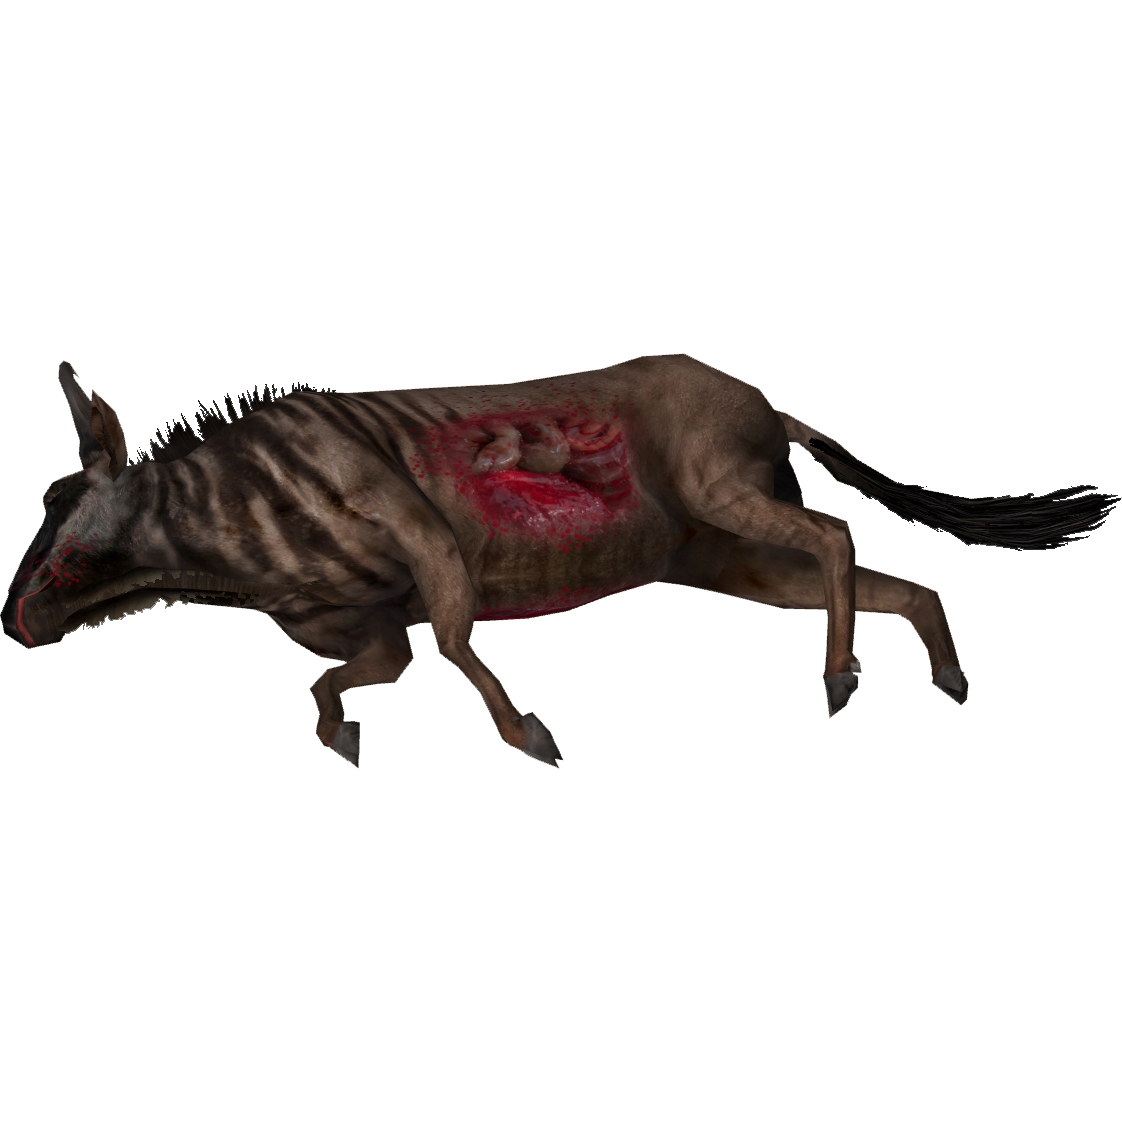 Collection of Dead Animal PNG. | PlusPNG